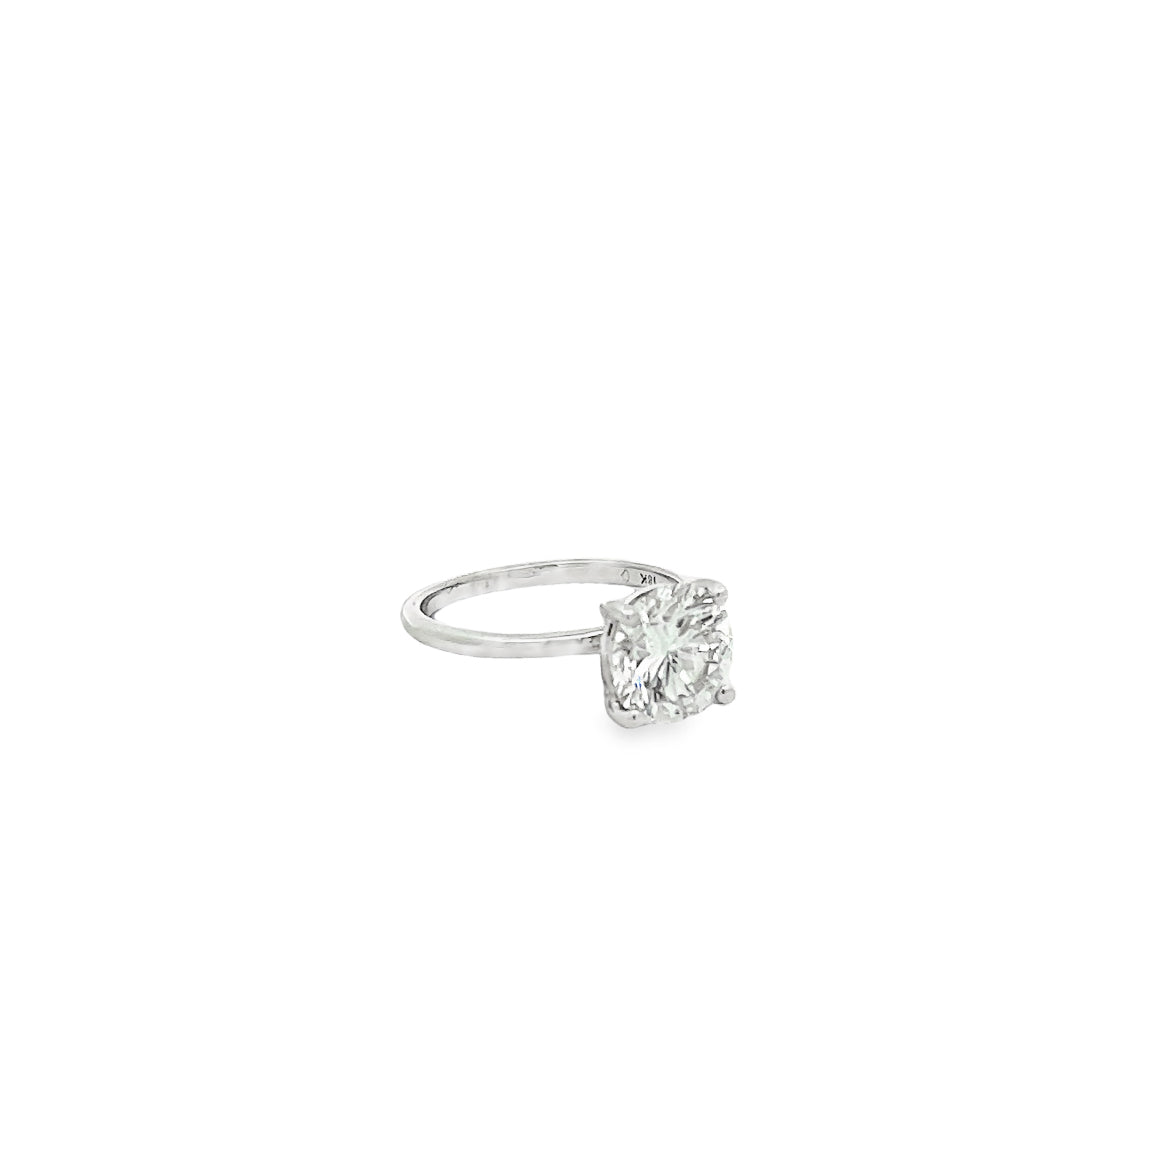 The 1974 18K White Gold Round Engagement Ring